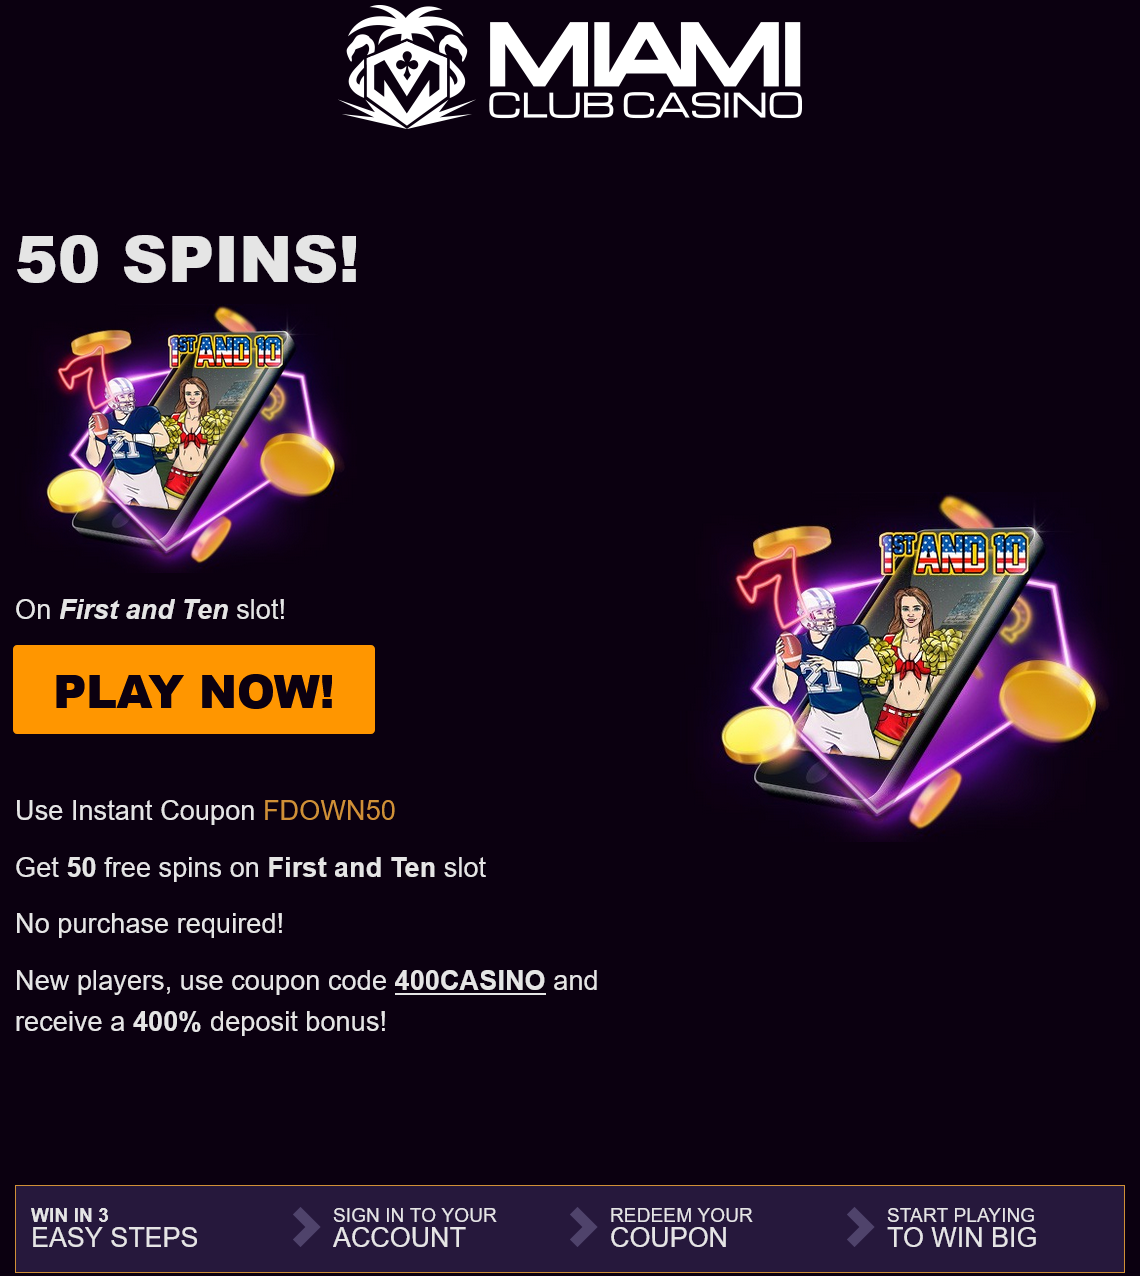 Miami
                                                          Club 50 Free
                                                          Spins 1st and
                                                          10